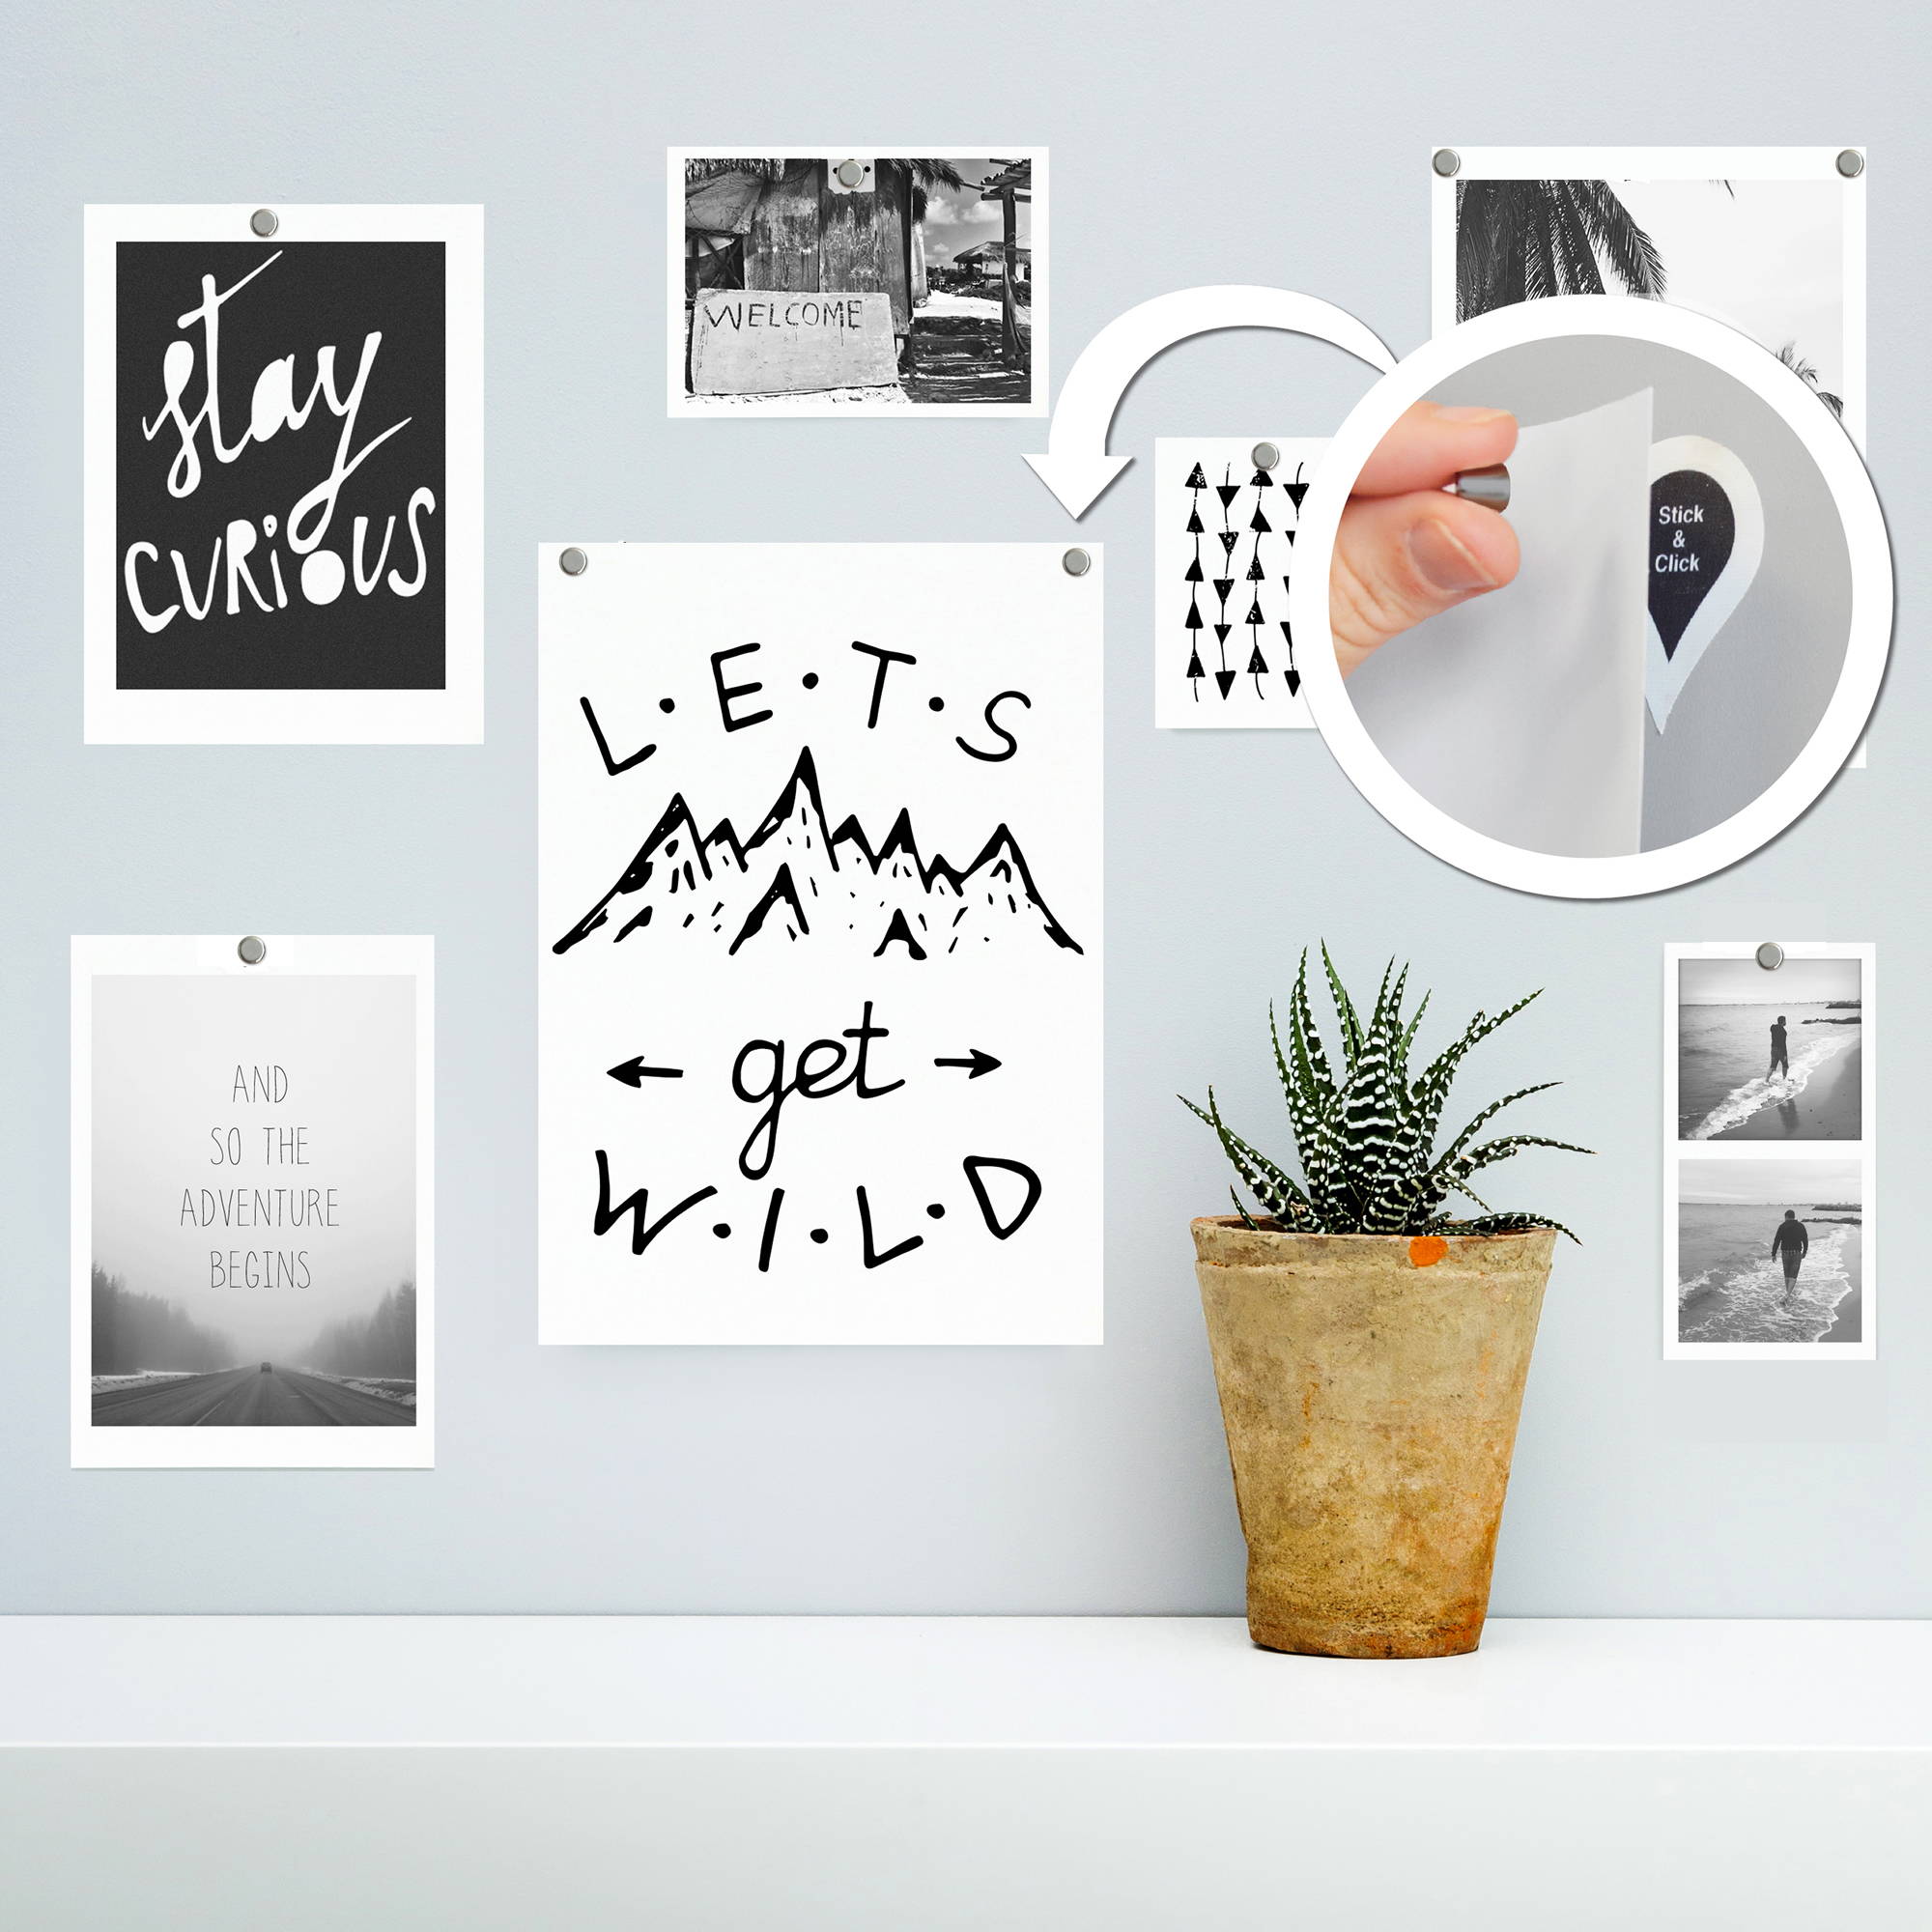 Good Hangups: These $2 Magnetic Hangers Allow You to Put Art on Any Surface